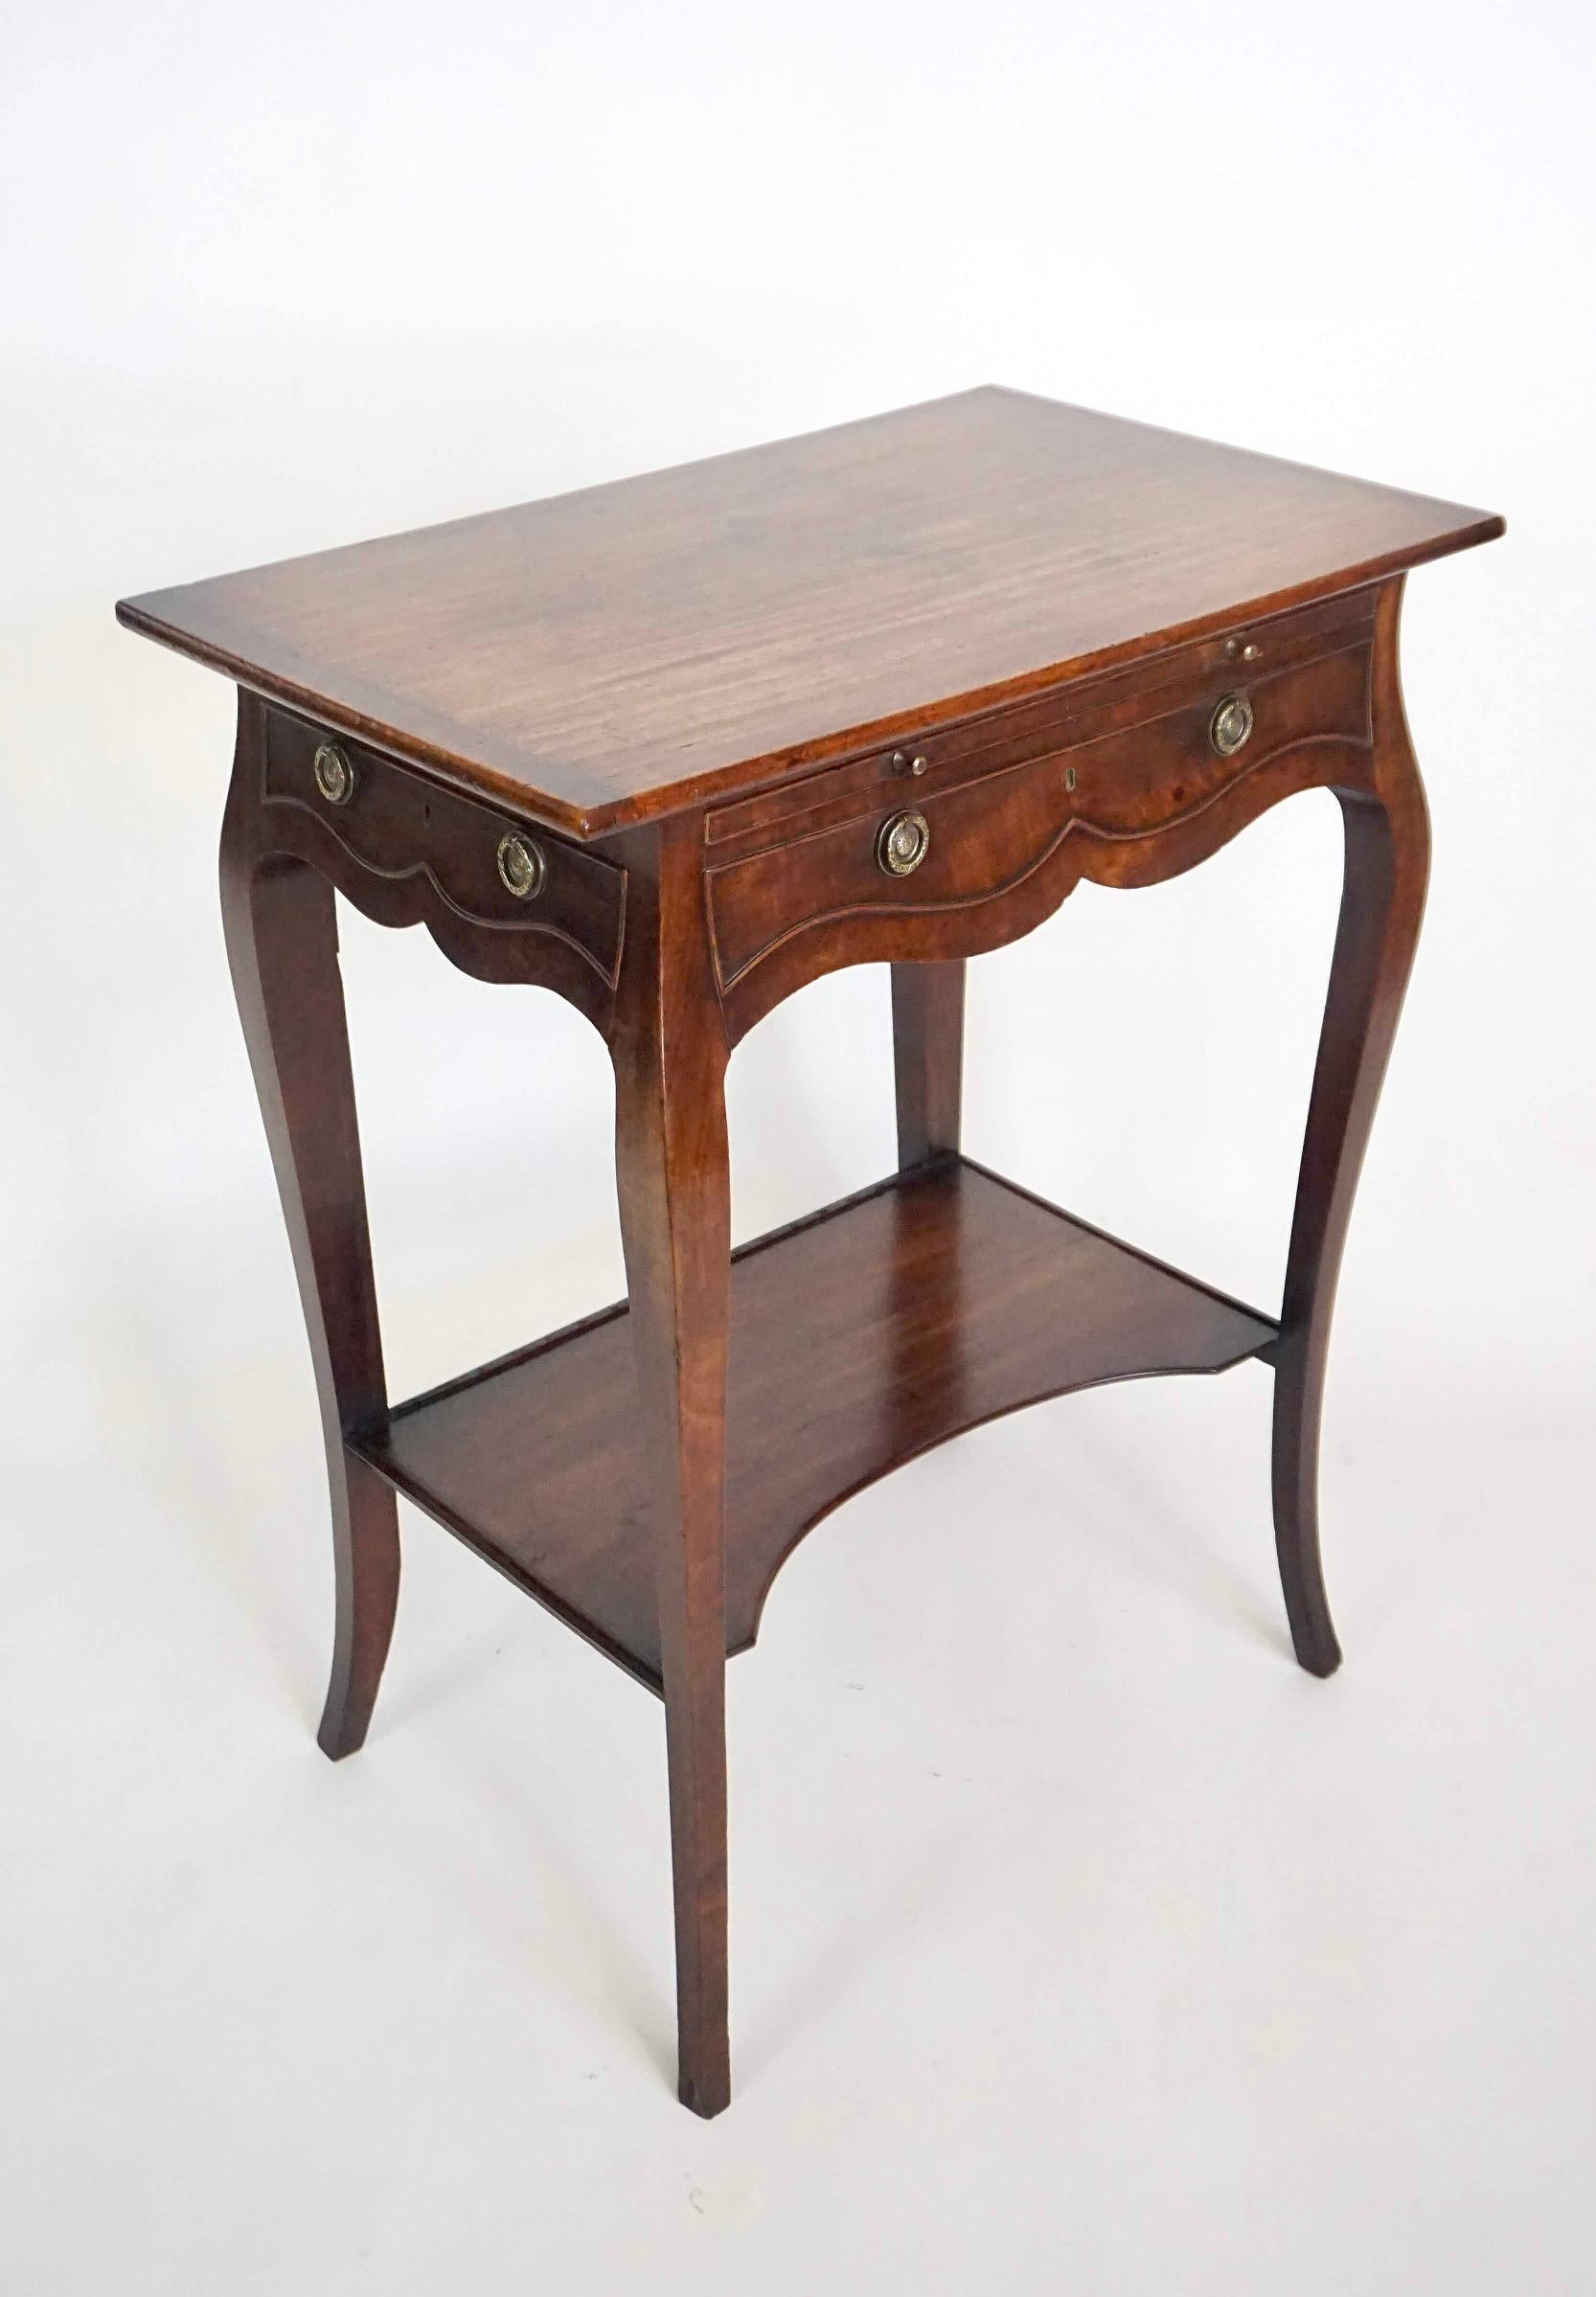 Hand-Crafted English George III Sabicu & Gonçalo Alves Work Table in the Manner of John Cobb For Sale